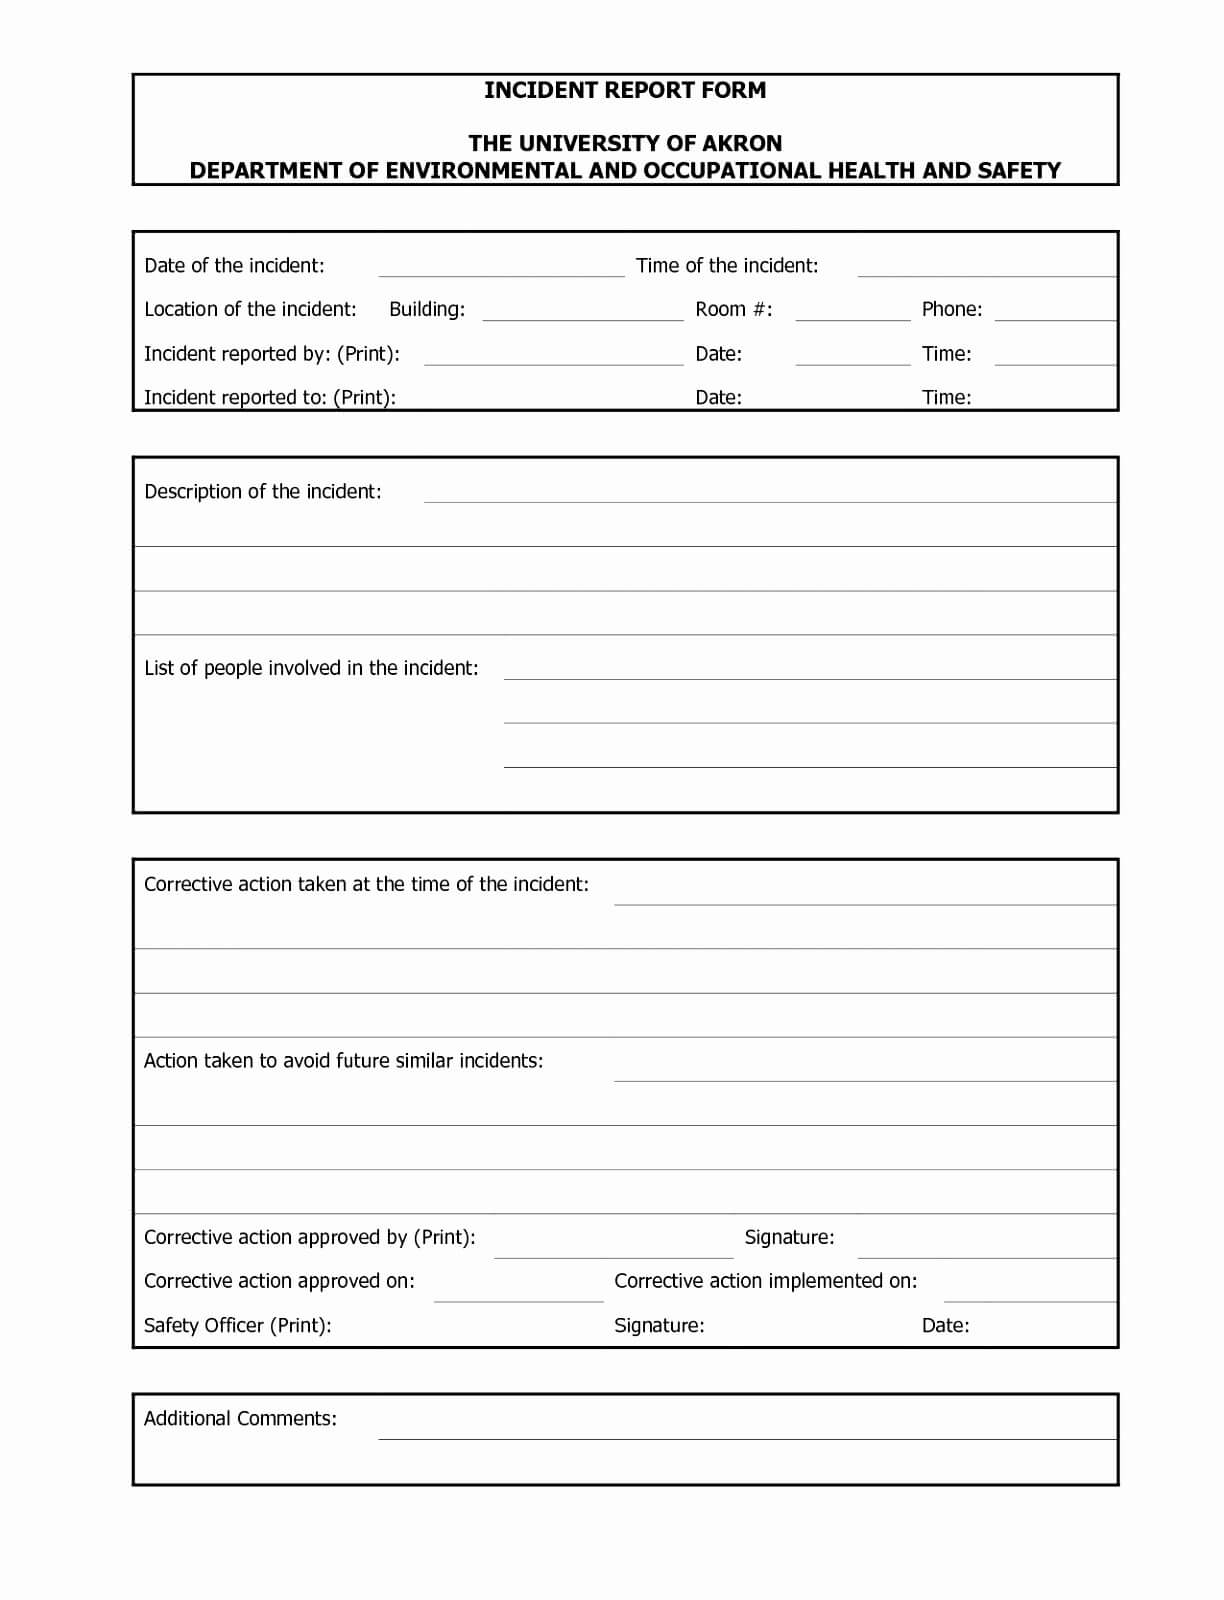 Automobile Accident Report Form Template Elegant Incident In Health And Safety Incident Report Form Template